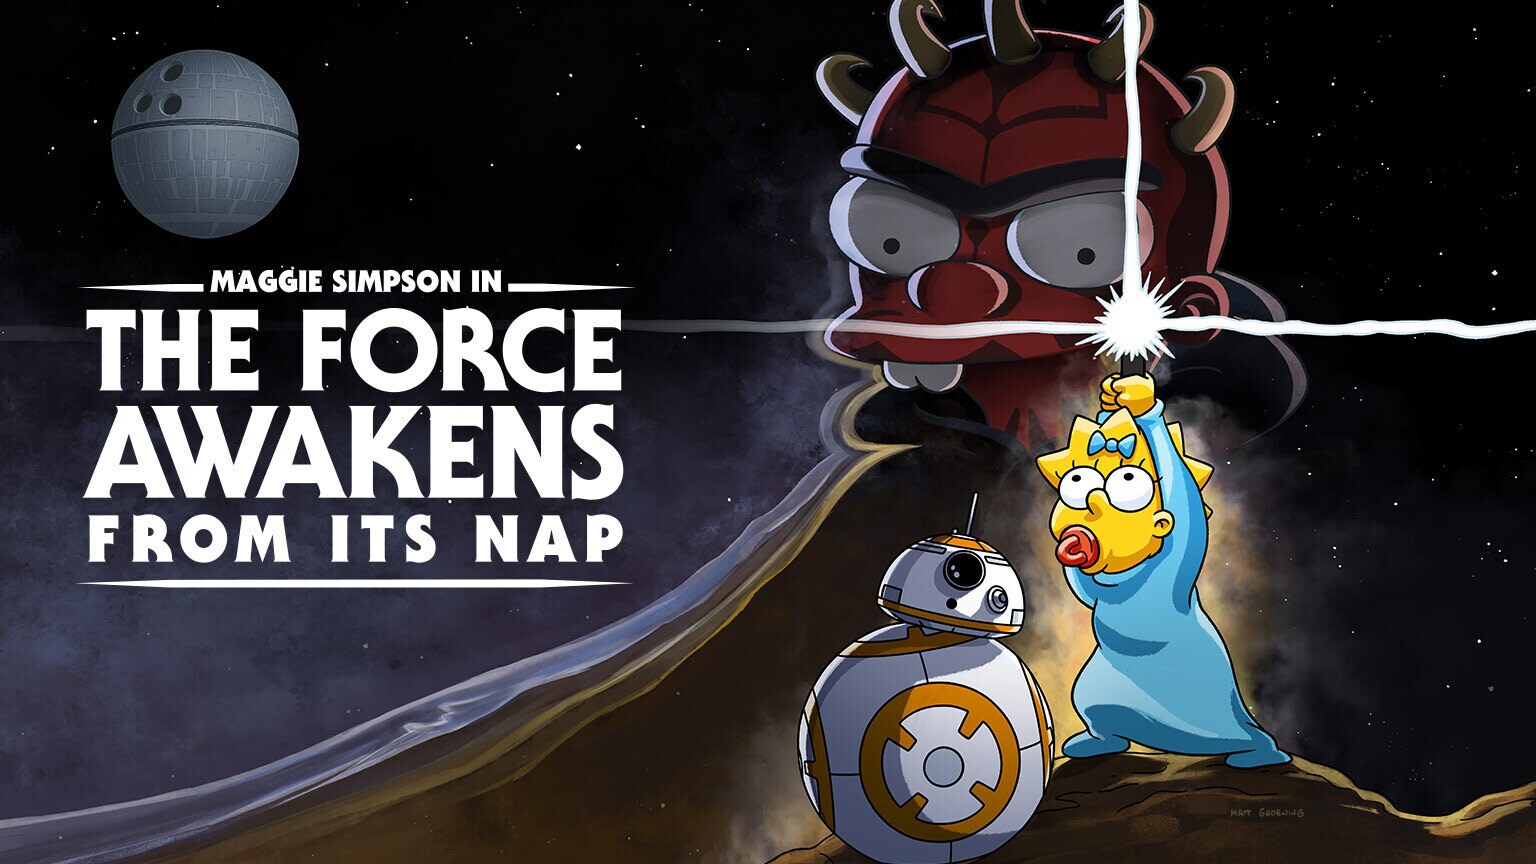 “The Force Awakens From Its Nap”: Behind-the-Scenes of the Surprise Star Wars Day Simpsons Short